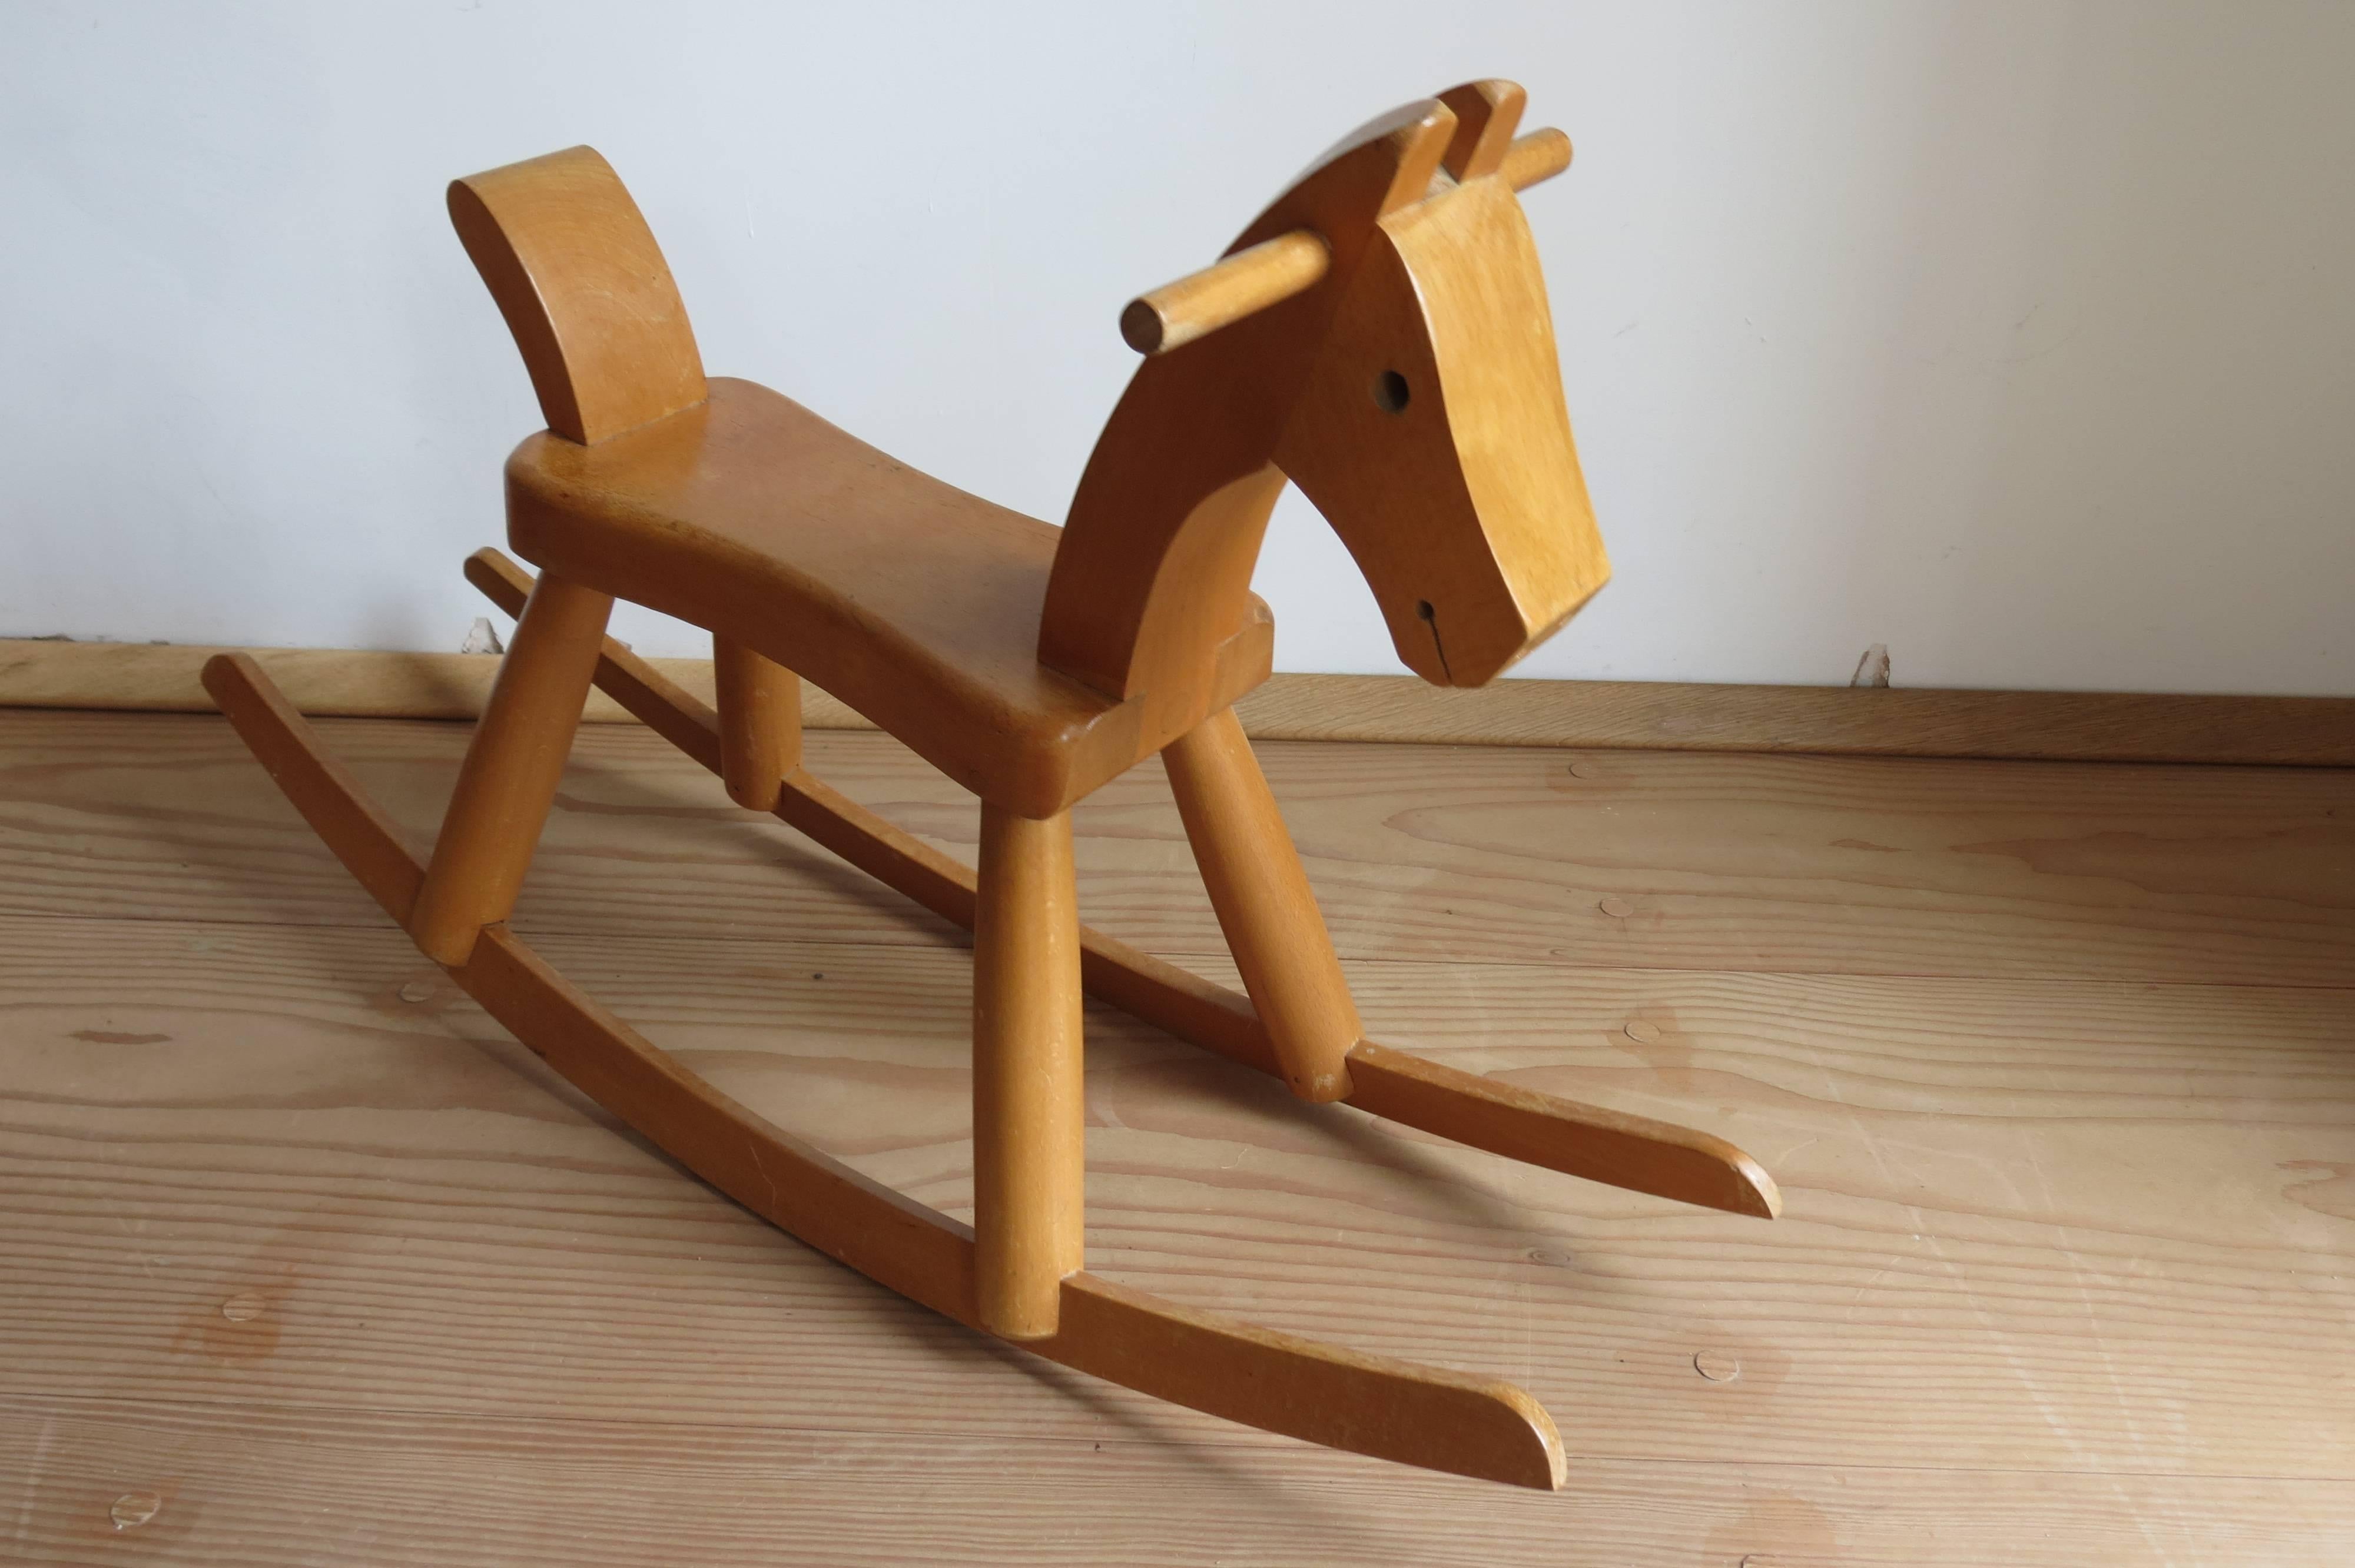 Vintage Danish rocking horse by Kay Bojesen
Original vintage Kay Bojesen rocking horse. 1960s edition, made from solid beech with a lacquered finish. Stamped to underside Kay Bojesen Denmark.
Two available, price is per piece, please note the